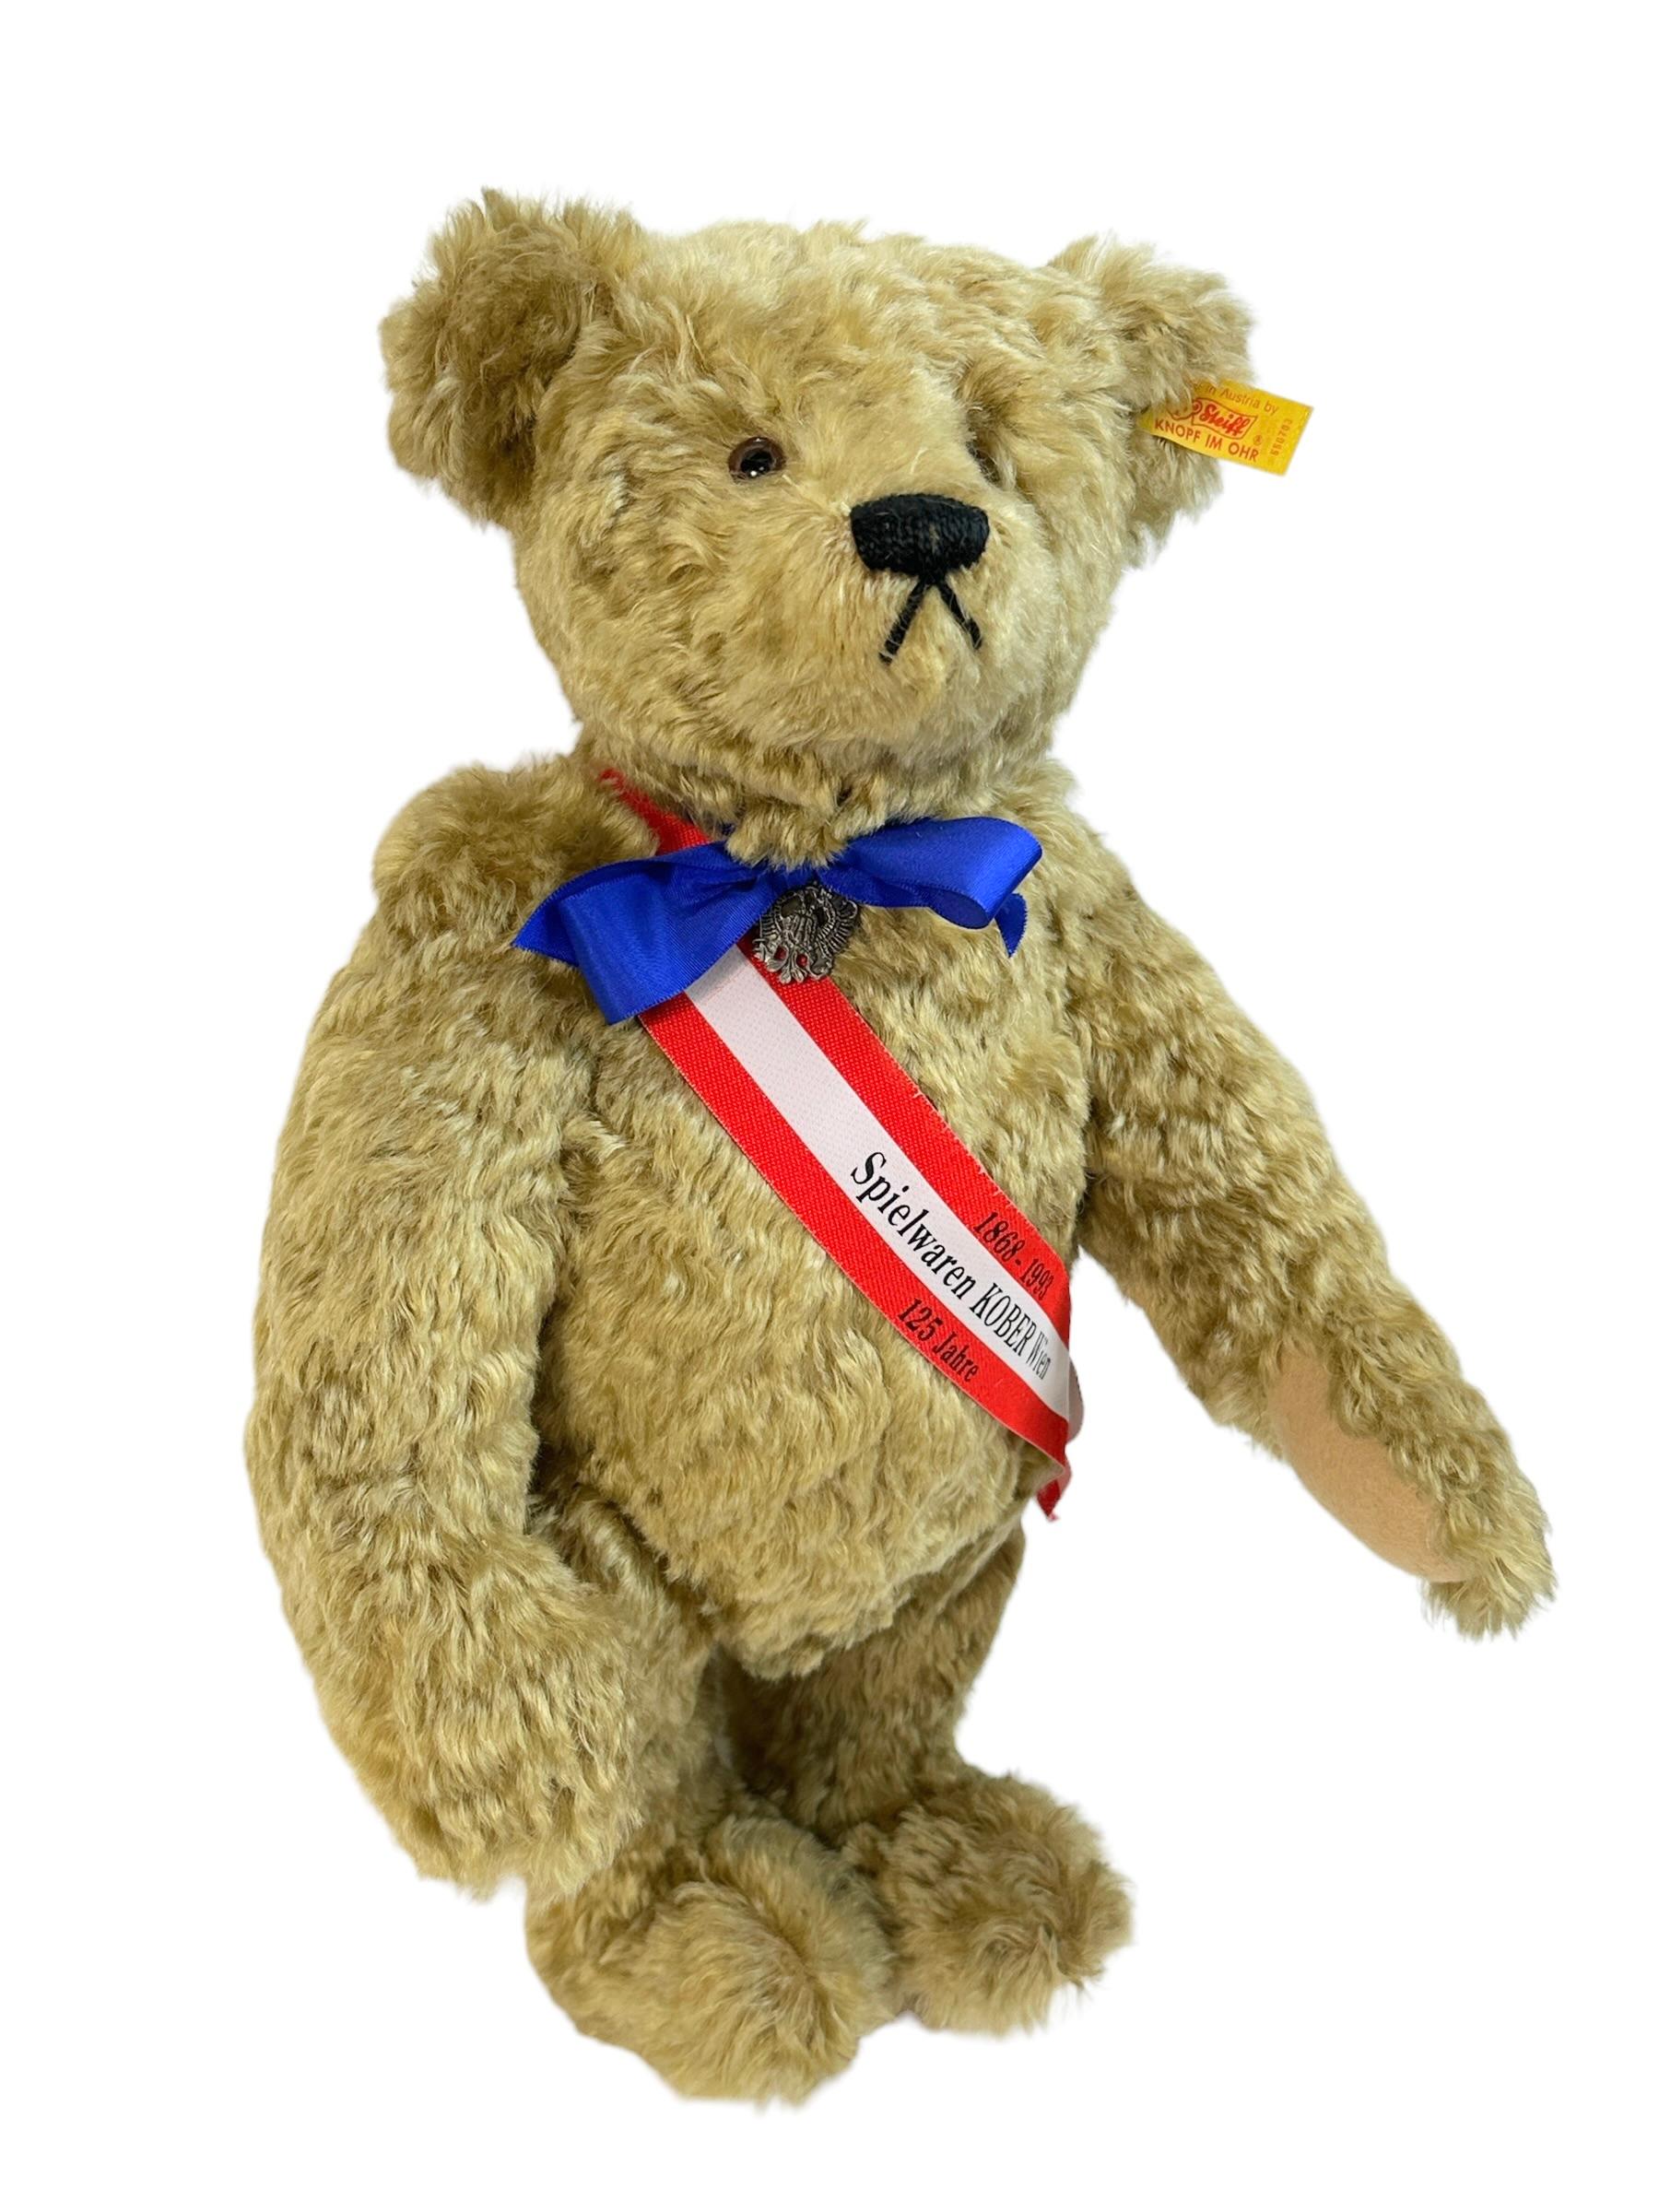 Mohair Steiff Collectible Teddy Bear Toy Store Kober Vienna exclusive, Vintage Austria For Sale